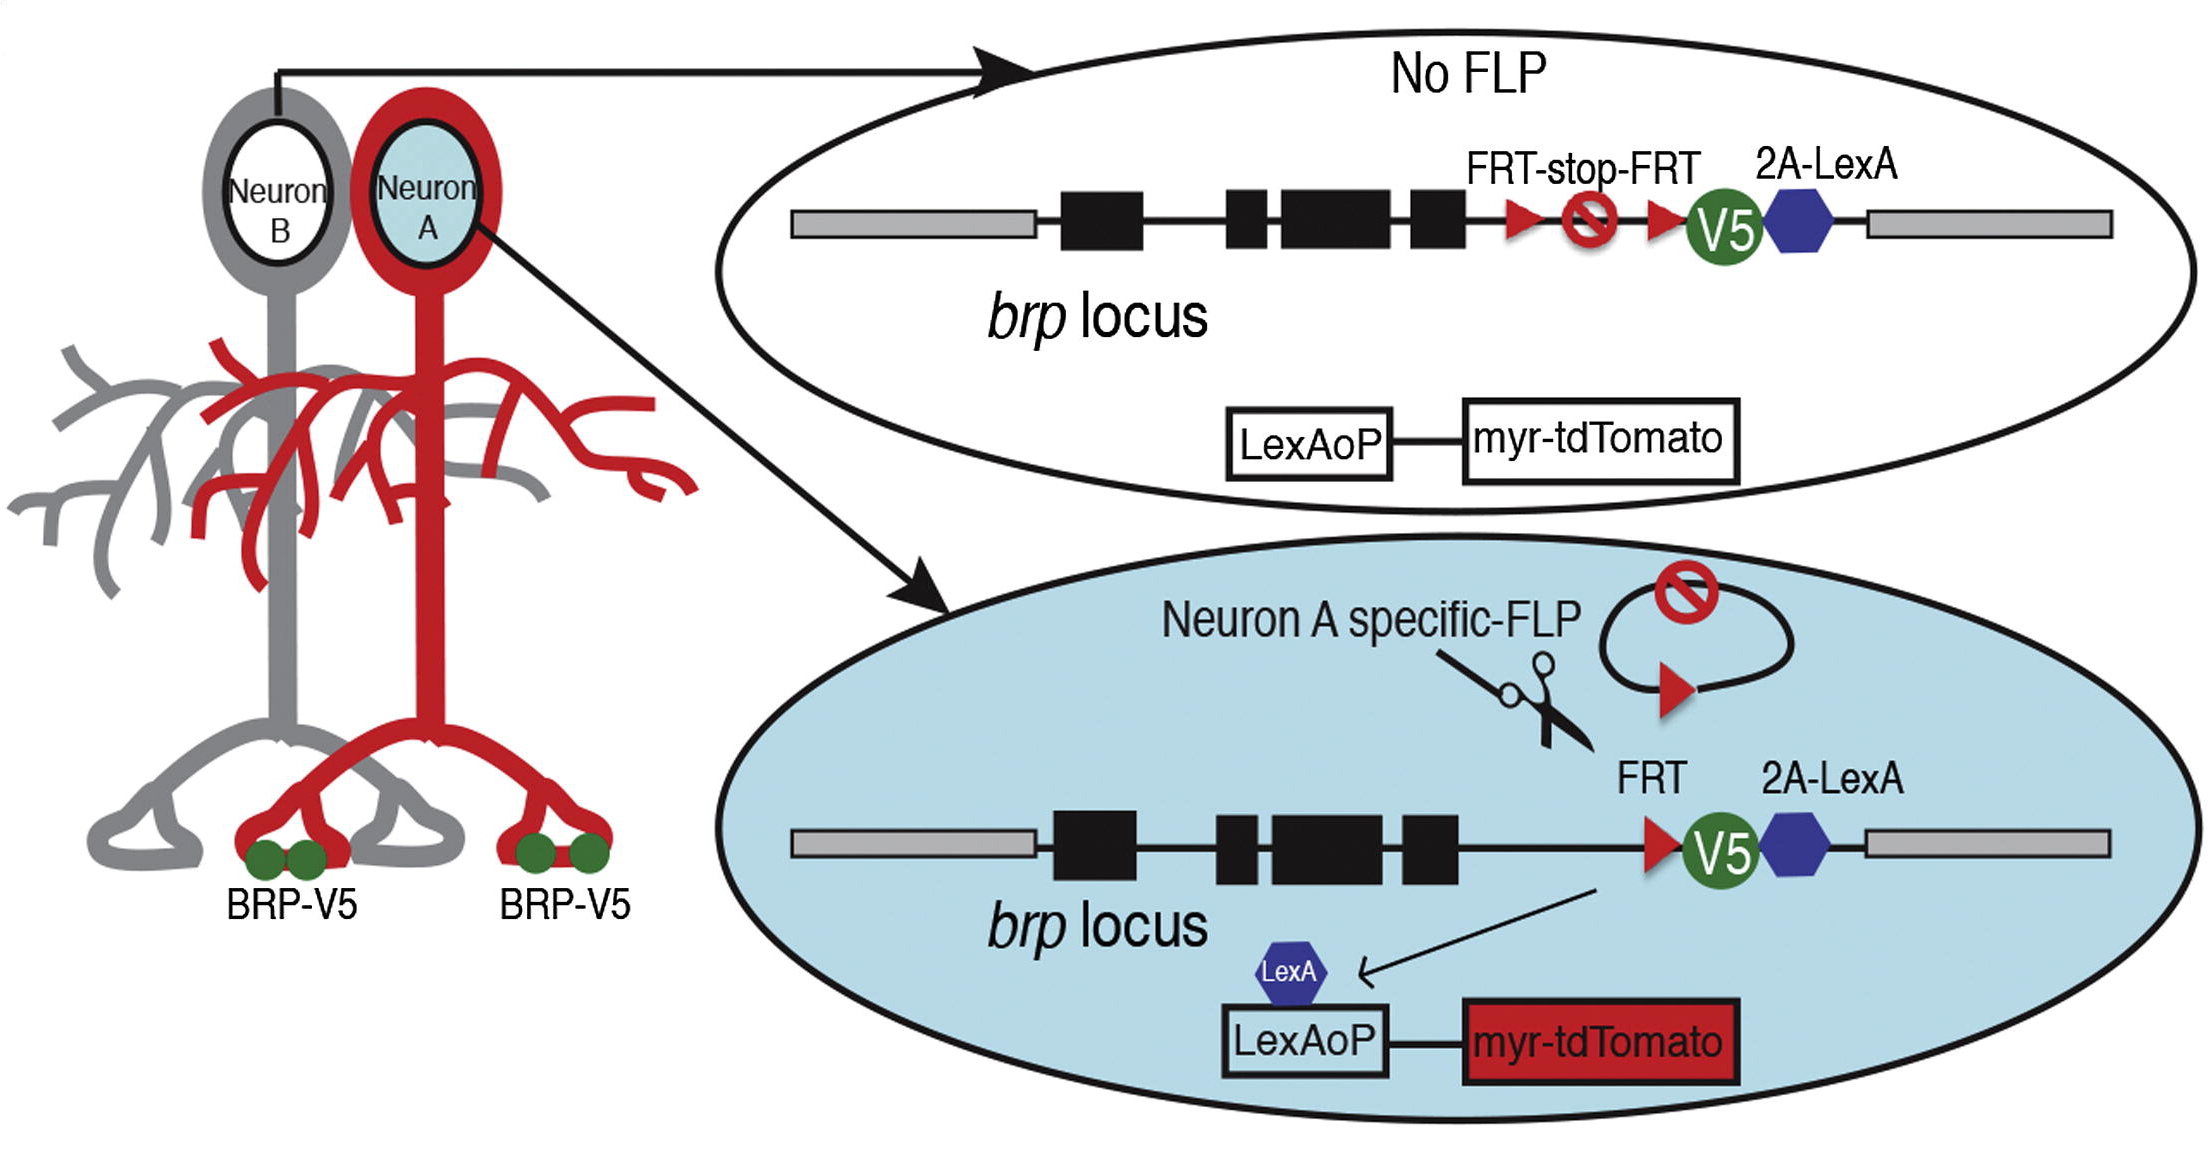 Figure of STaR presynaptic marking from Chen et al. (2013), Cell-type-Specific Labeling of Synapses In Vivo through Synaptic Tagging with Recombination. Neuron 81: 280–293.